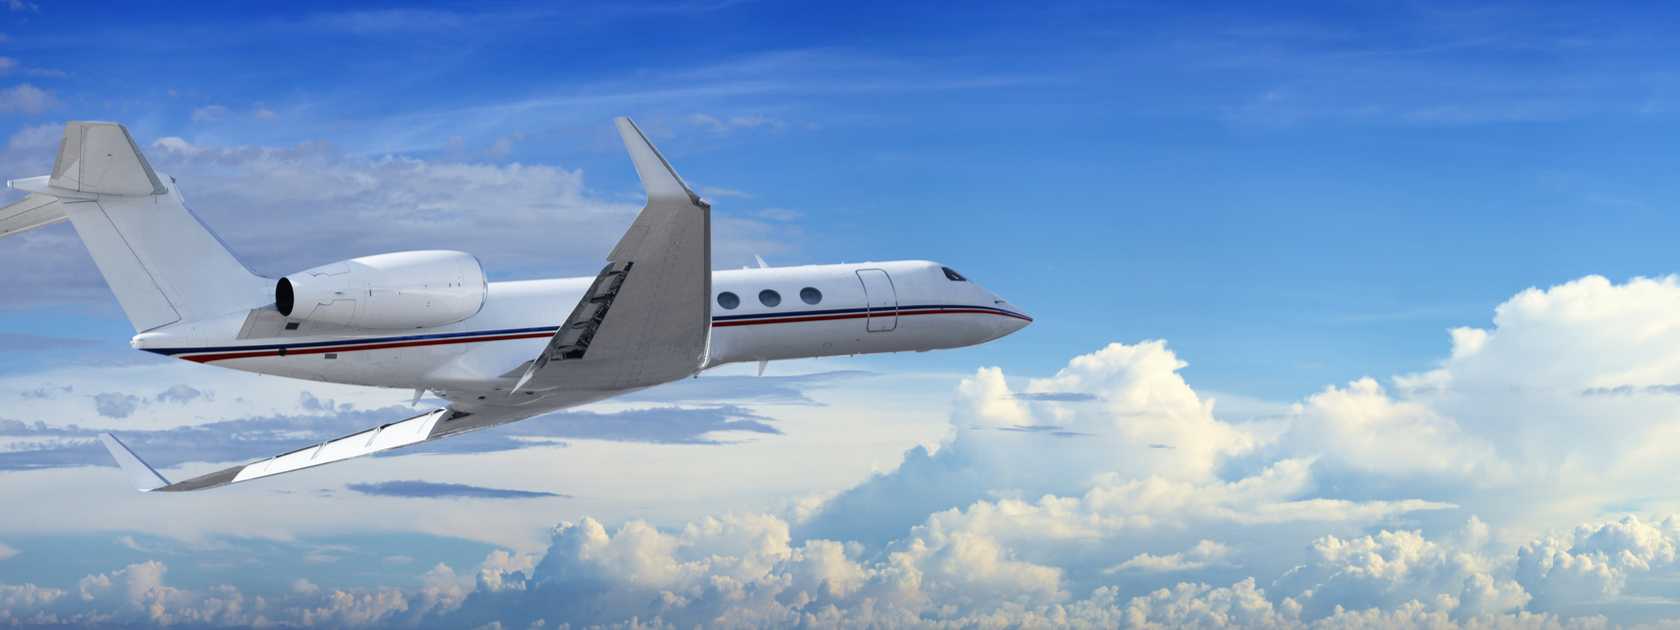 How to hire a private jet CNN Travel